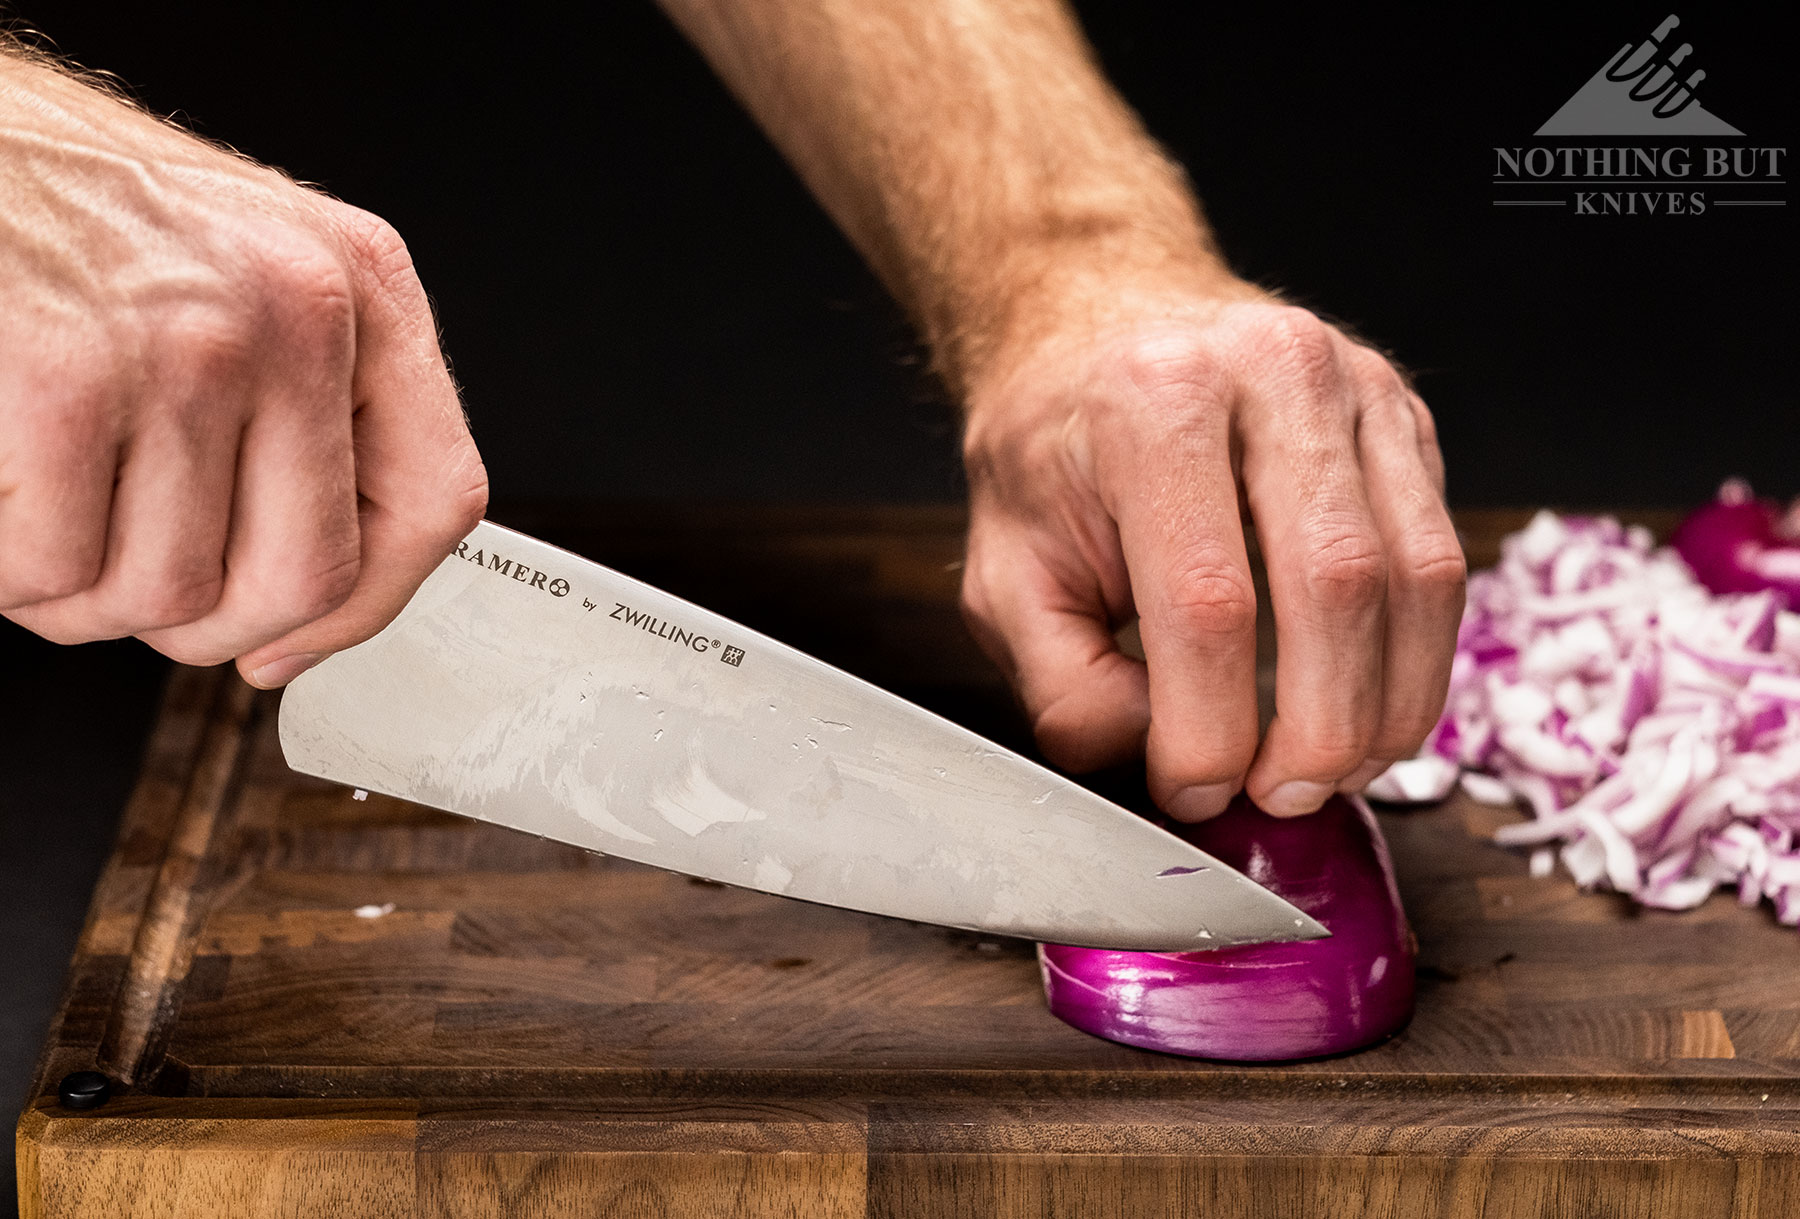 Making small cuts in a red onion with the Bob Kramer designed Zwilling chef knife.